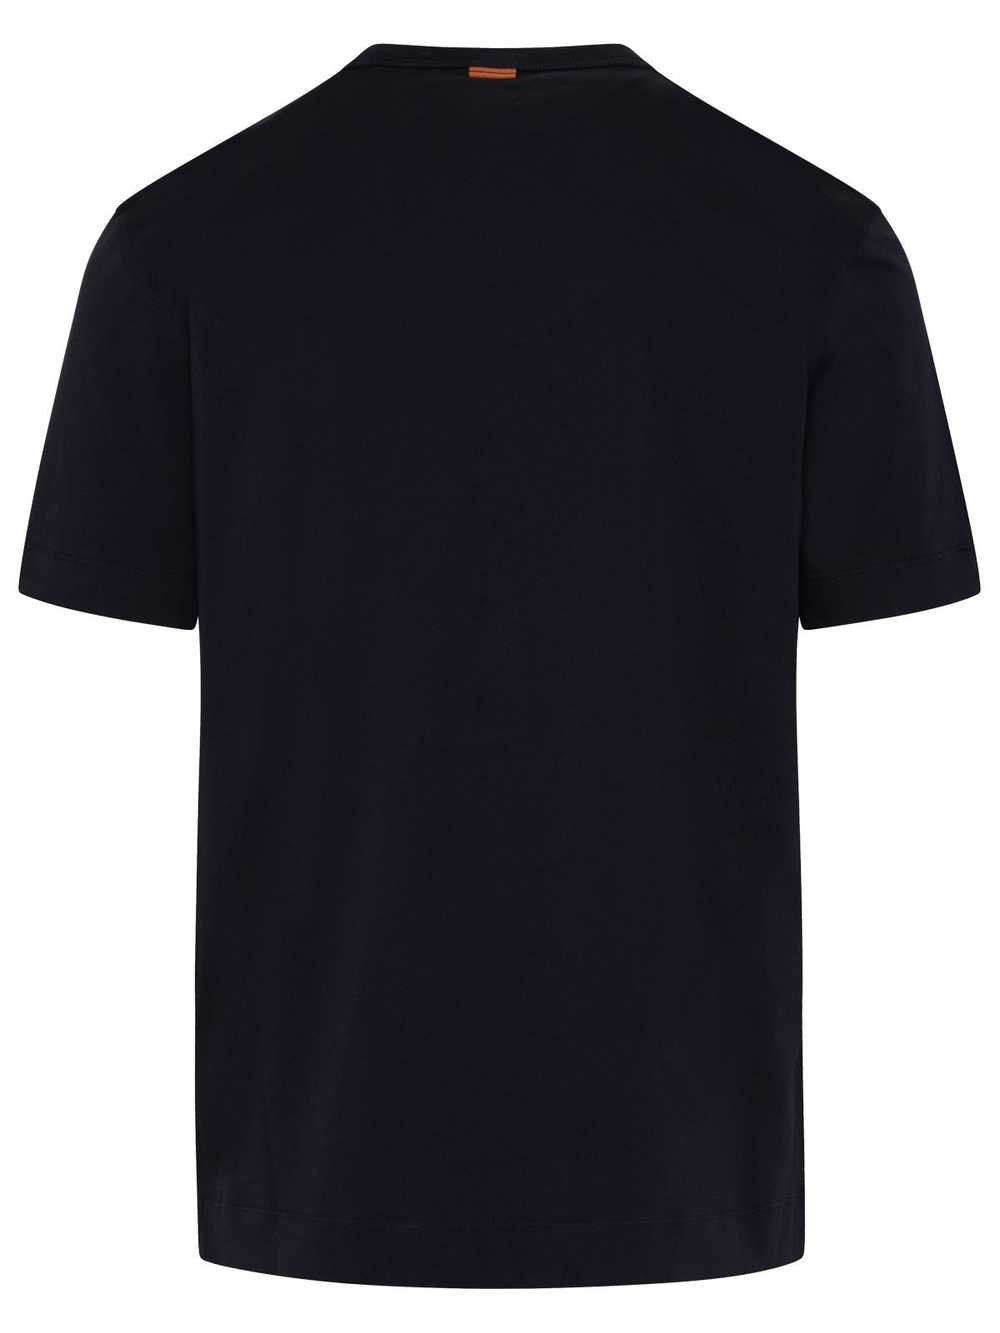 ZEGNA Man T-Shirt In Cotone Navy - image 3